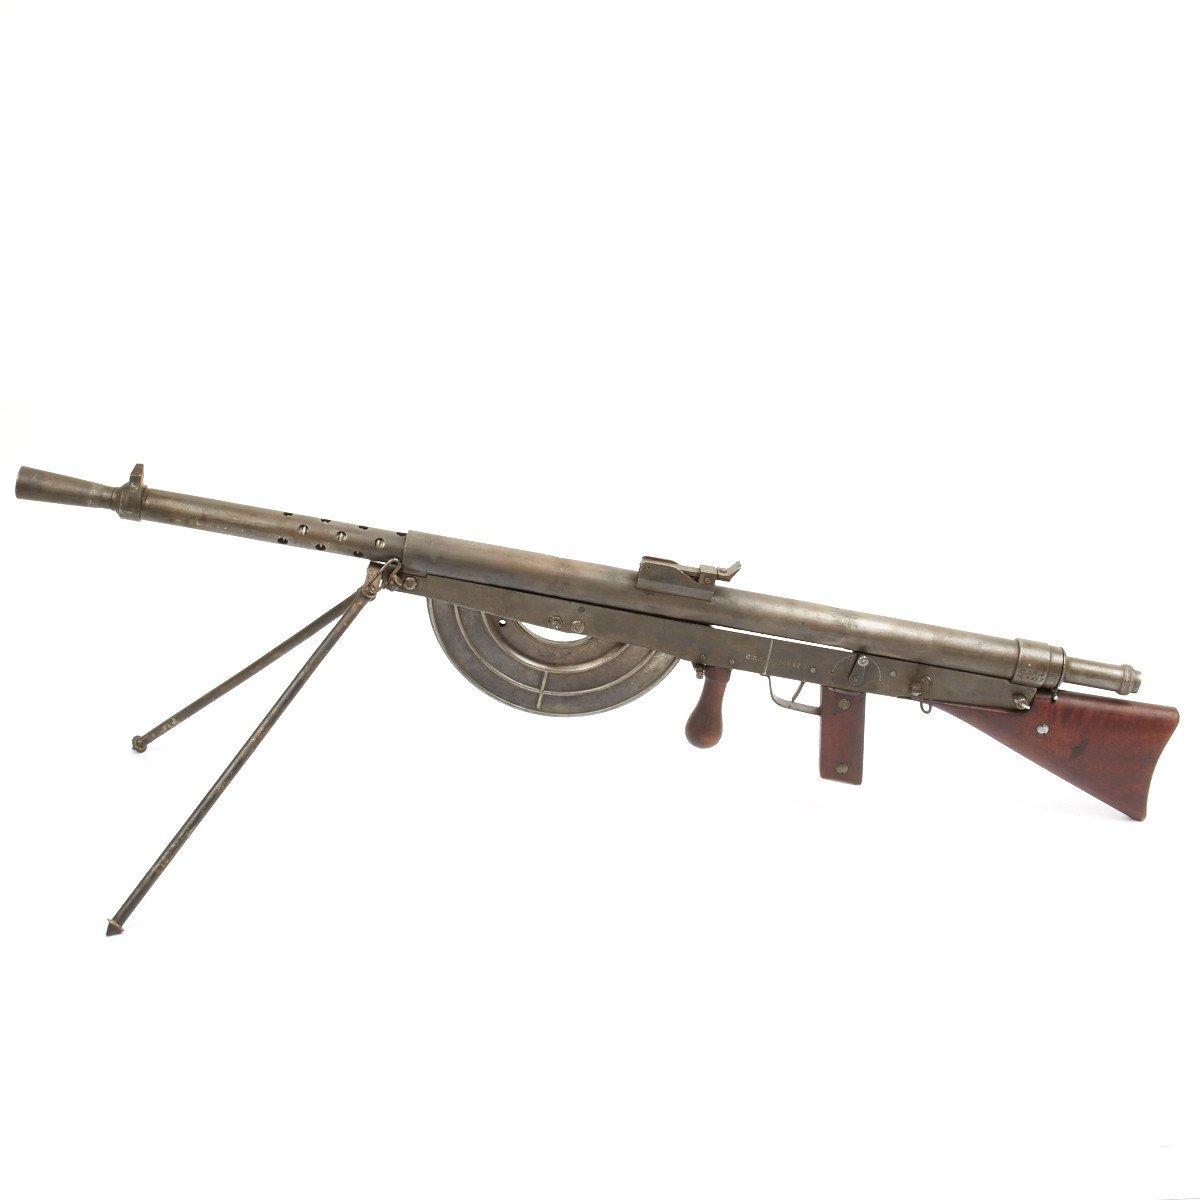 Original French Wwi Fusil Mitrailleur Modele 1915 Csrg Chauchat Display